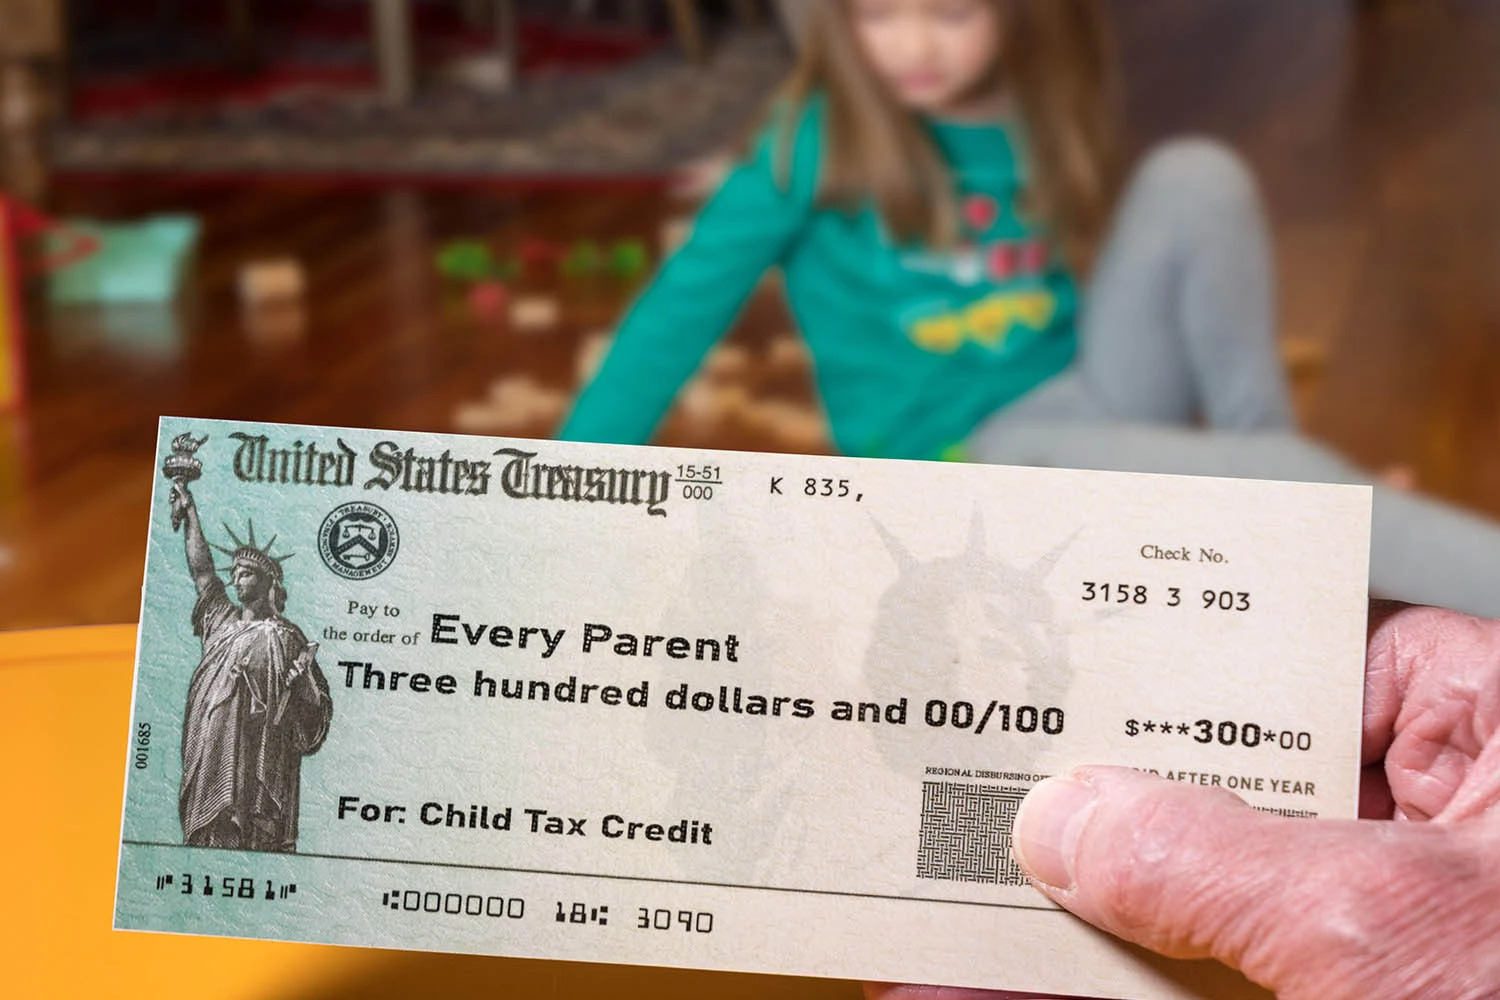 Fourth child tax credit payment goes out this week - The US Armenians